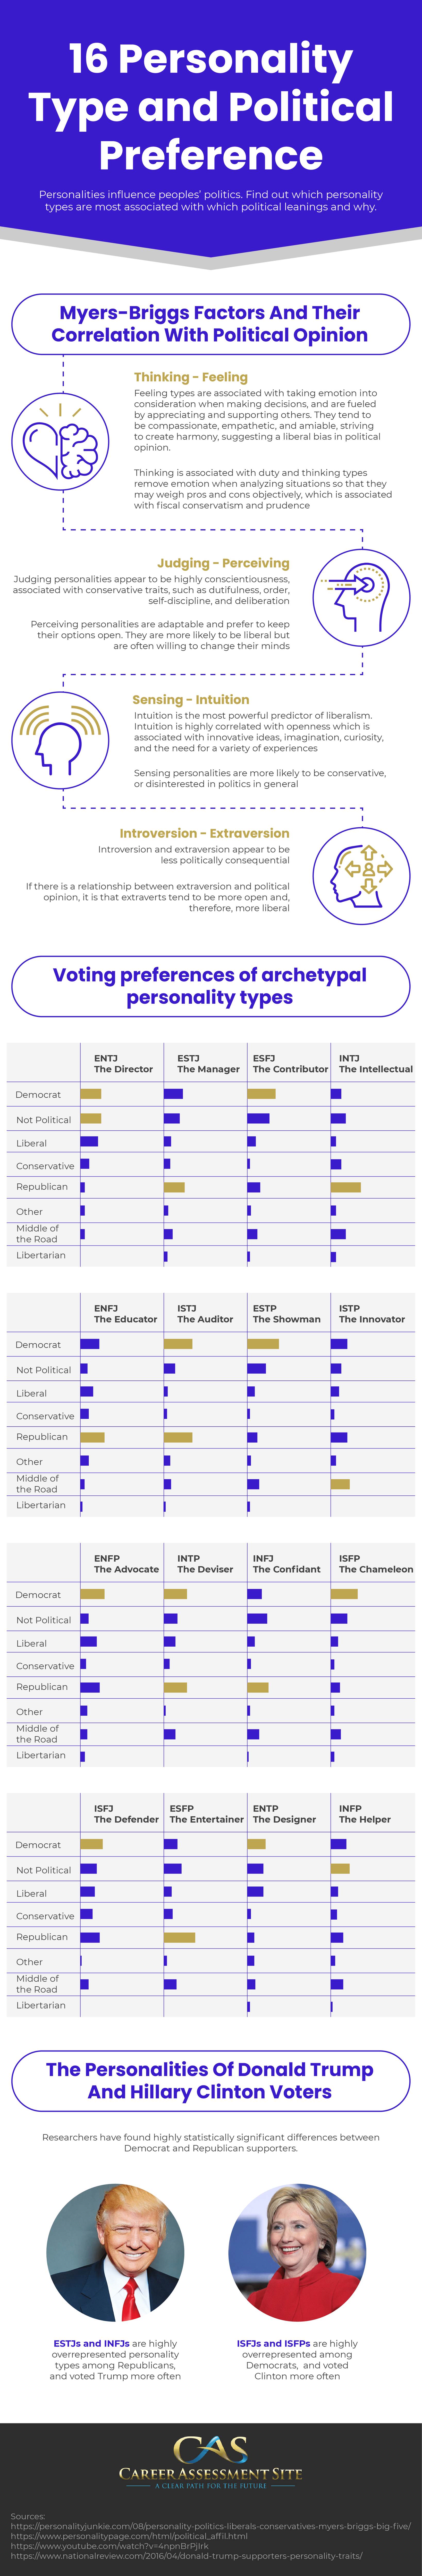 Personality Type by Political Preference